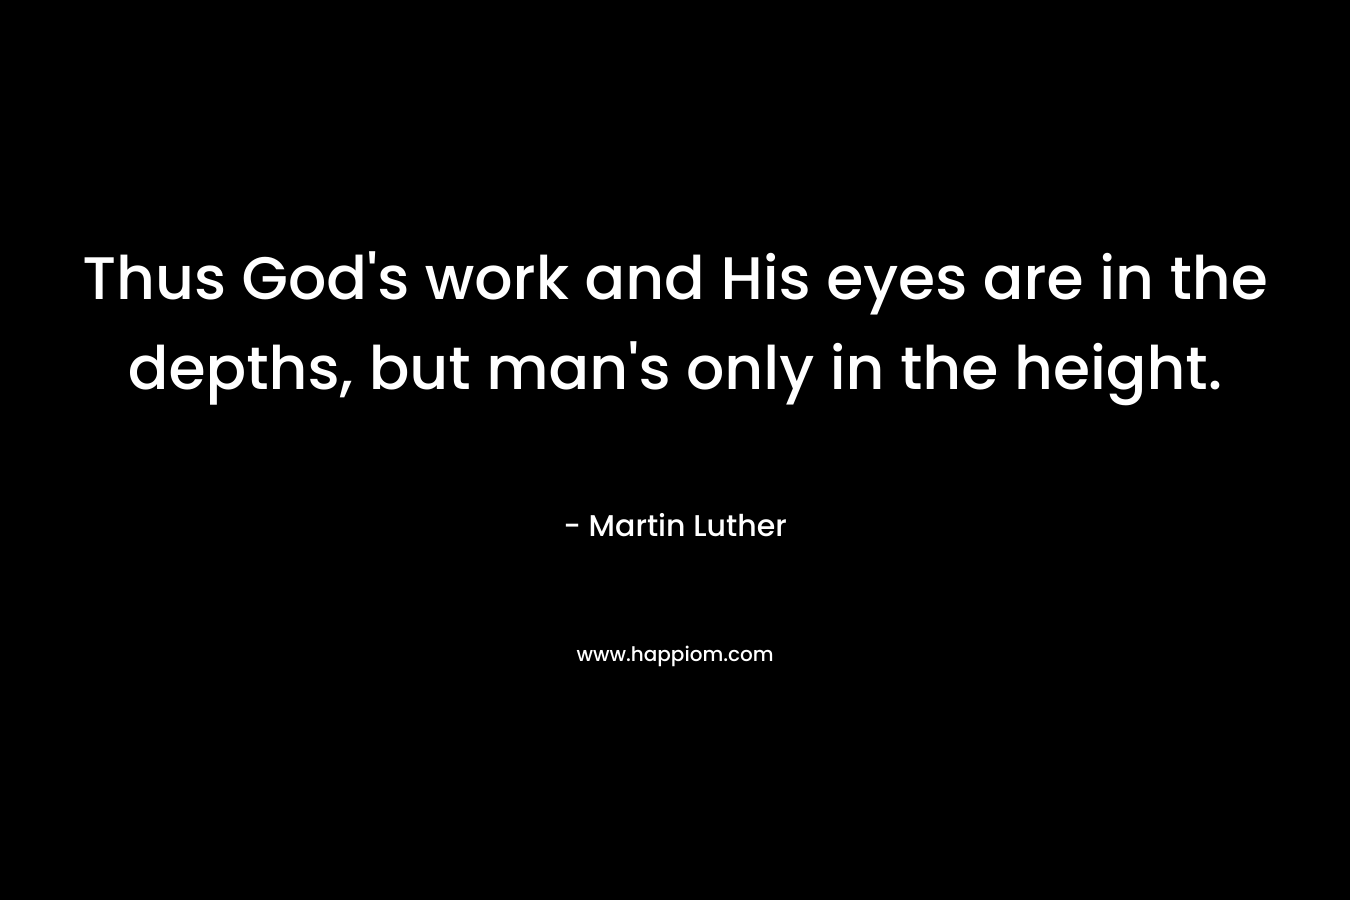 Thus God’s work and His eyes are in the depths, but man’s only in the height. – Martin Luther